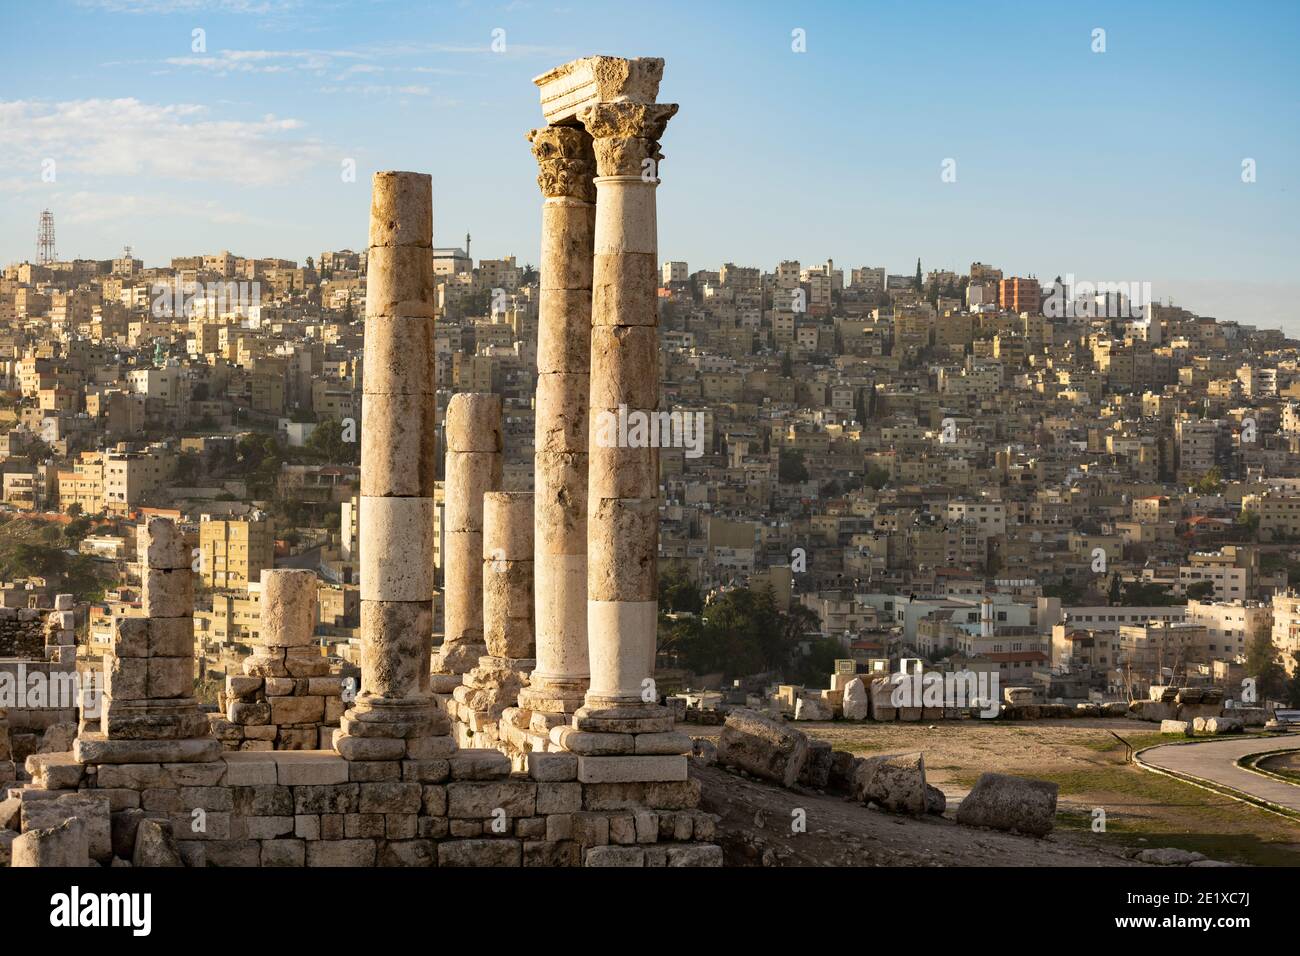 Stunning view of the old ruins in the Amman Citadel, Jordan. The Amman Citadel is a historical site at the center of downtown Amman, Jordan Stock Photo